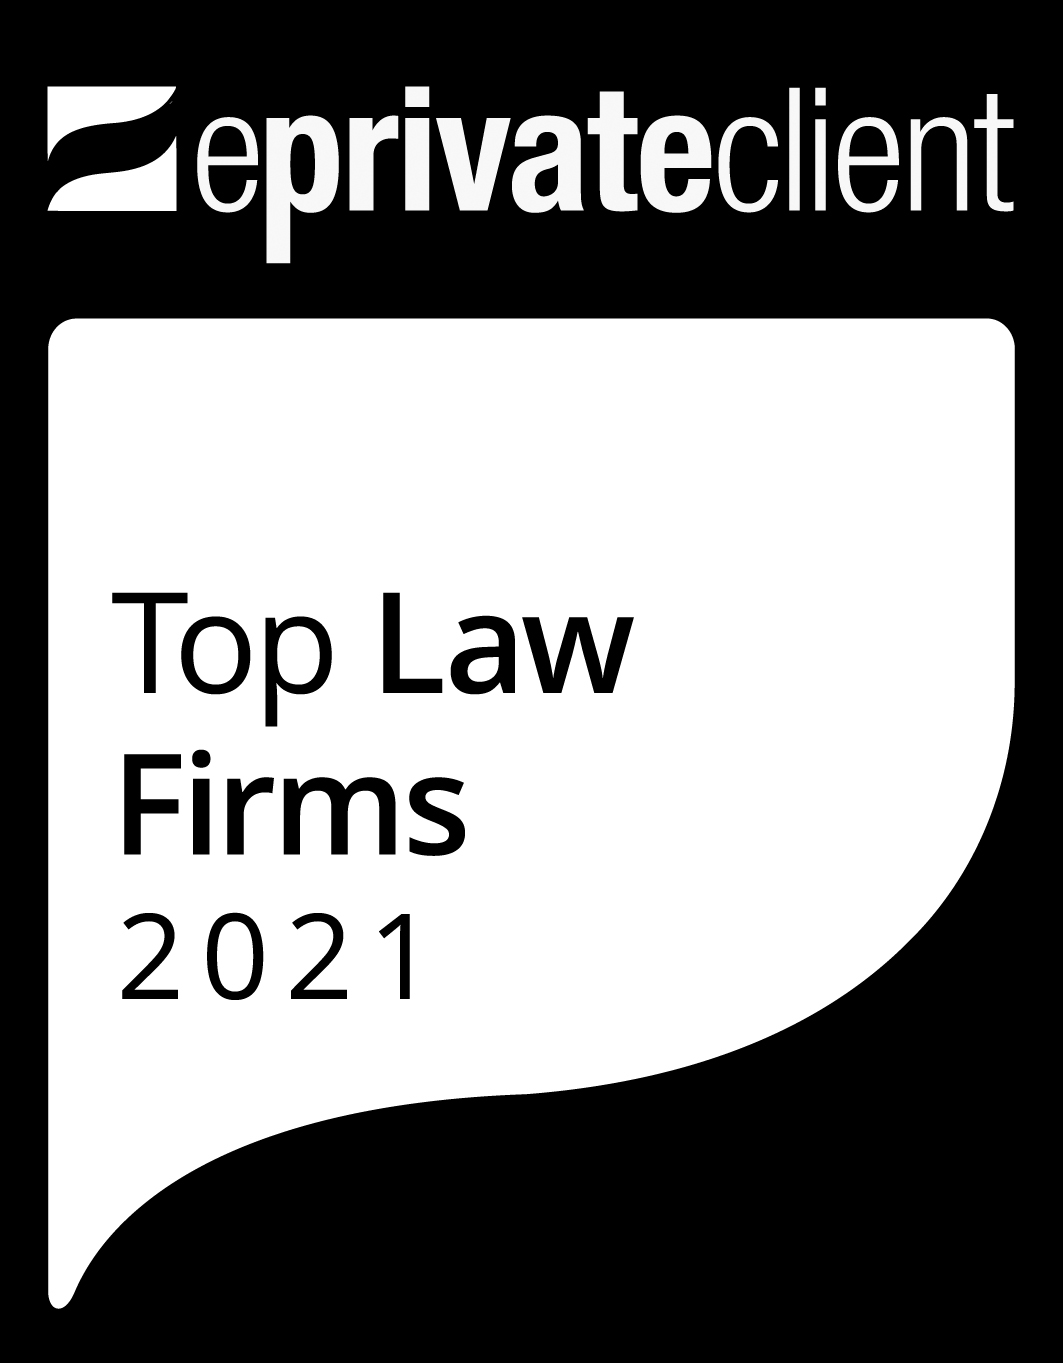 eprivateclient Top Law Firms 2021.